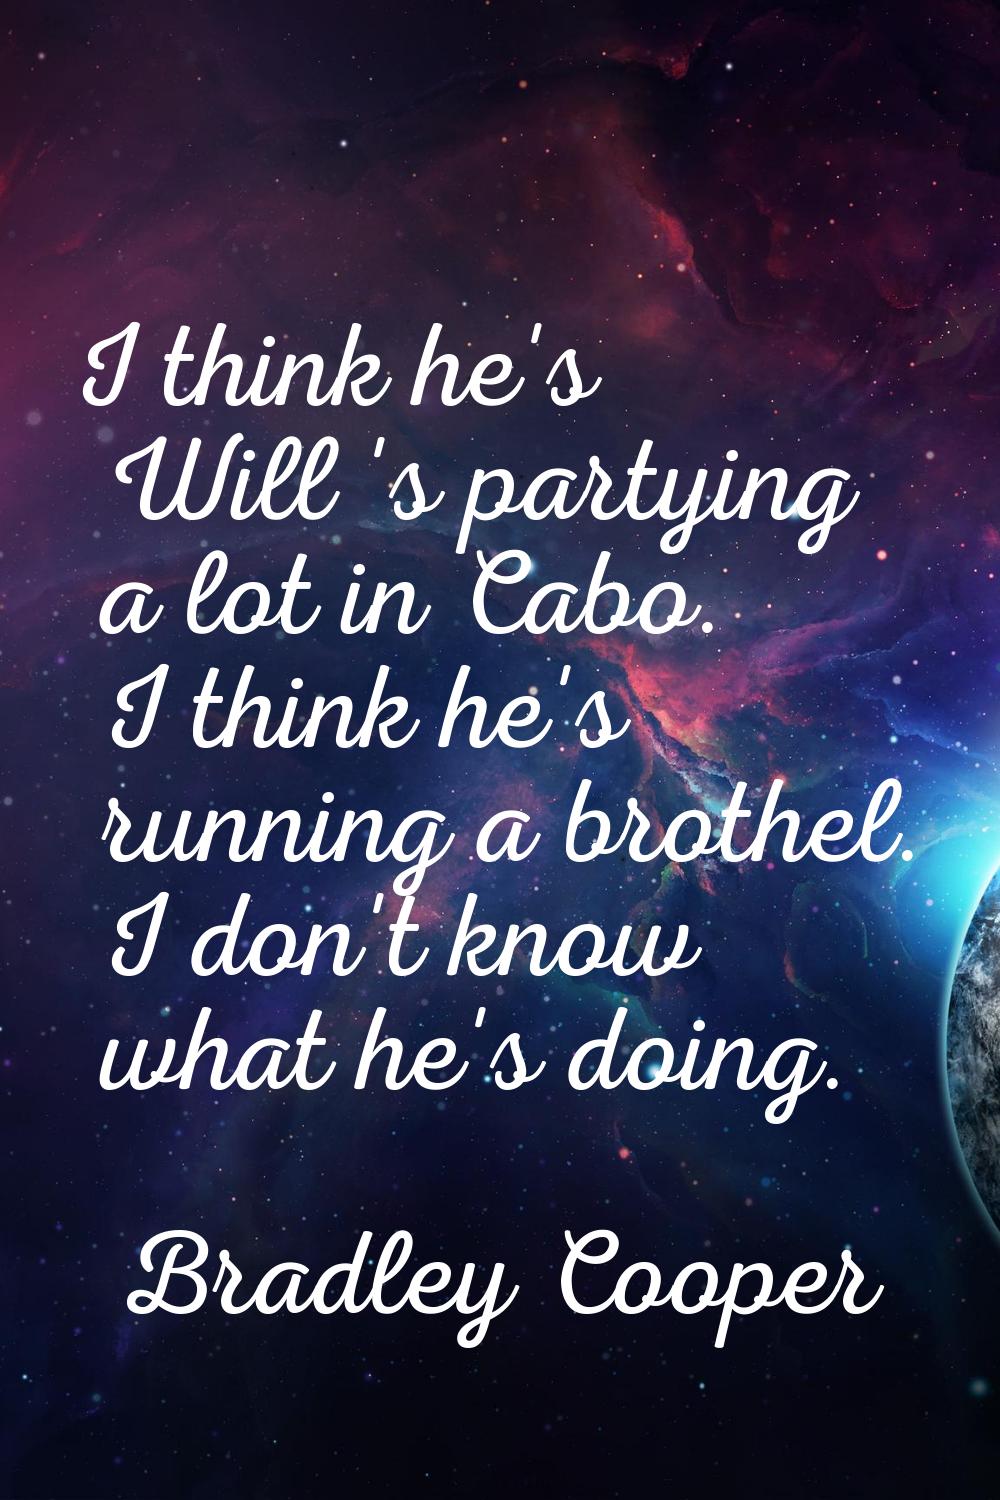 I think he's Will 's partying a lot in Cabo. I think he's running a brothel. I don't know what he's